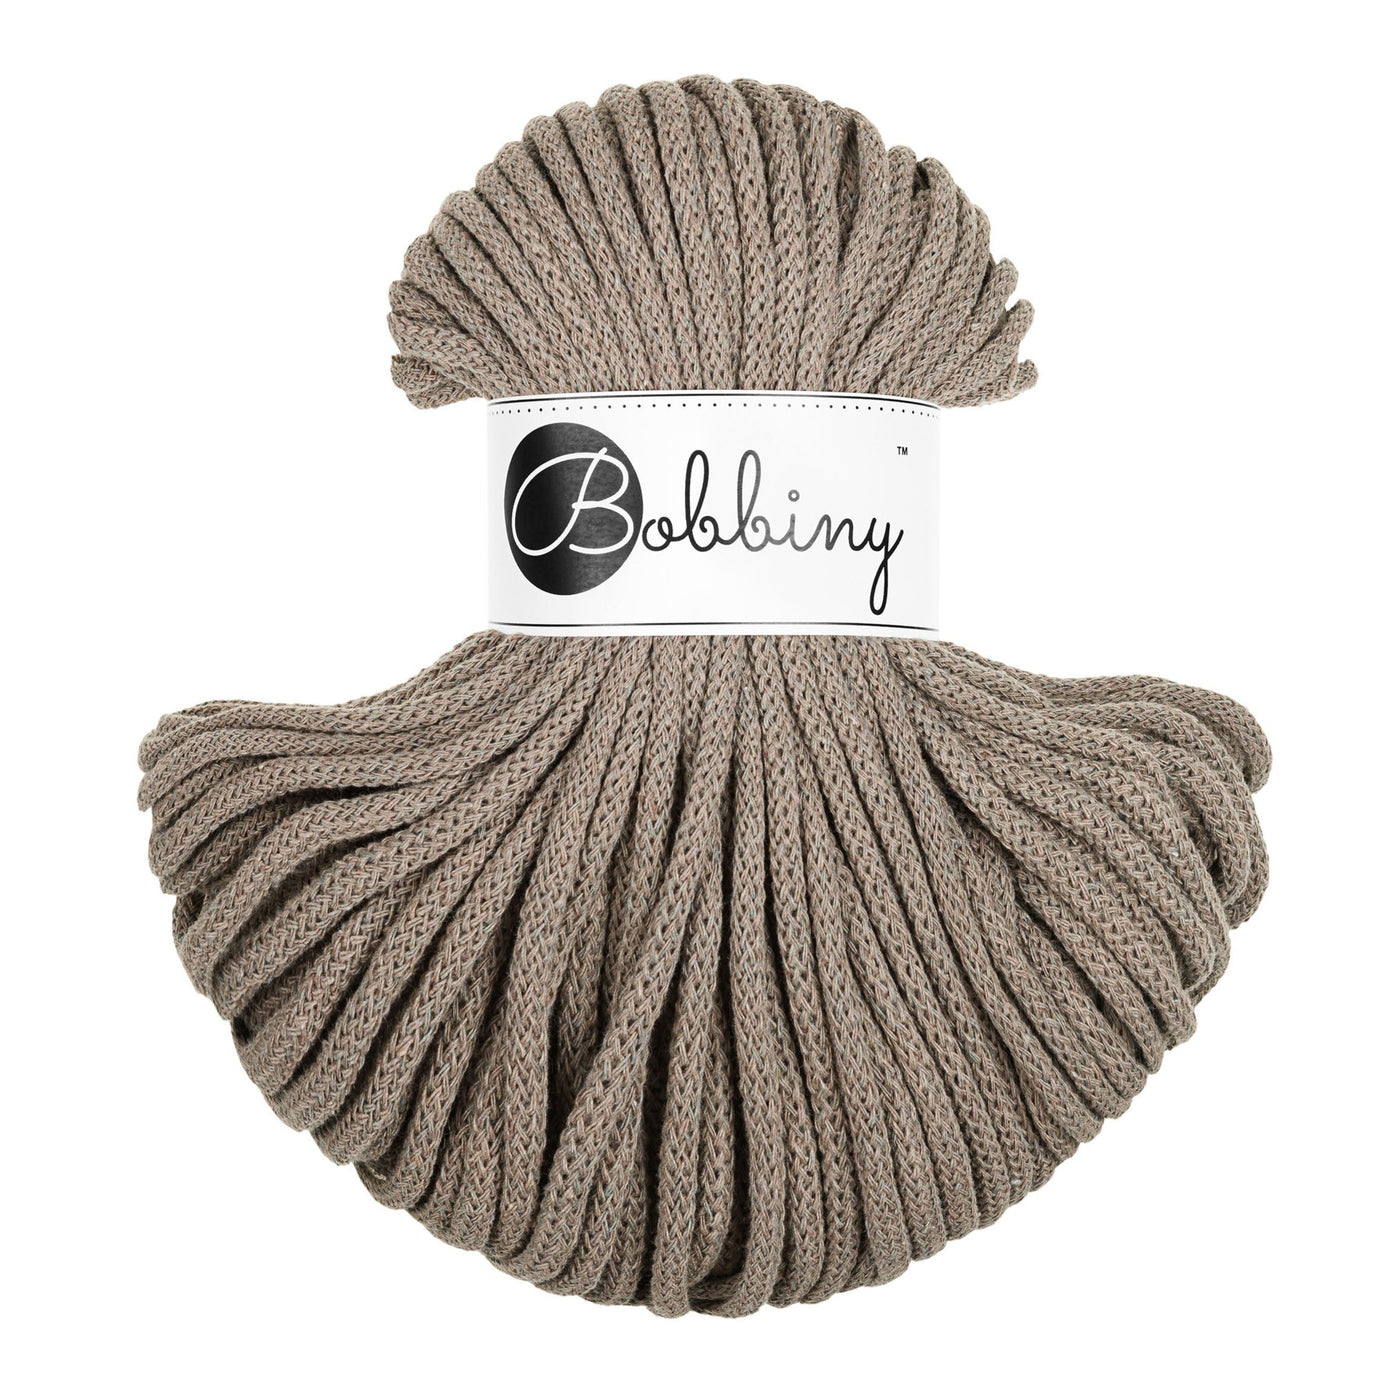 Bobbiny braided cord 5mm 50m in beige shade